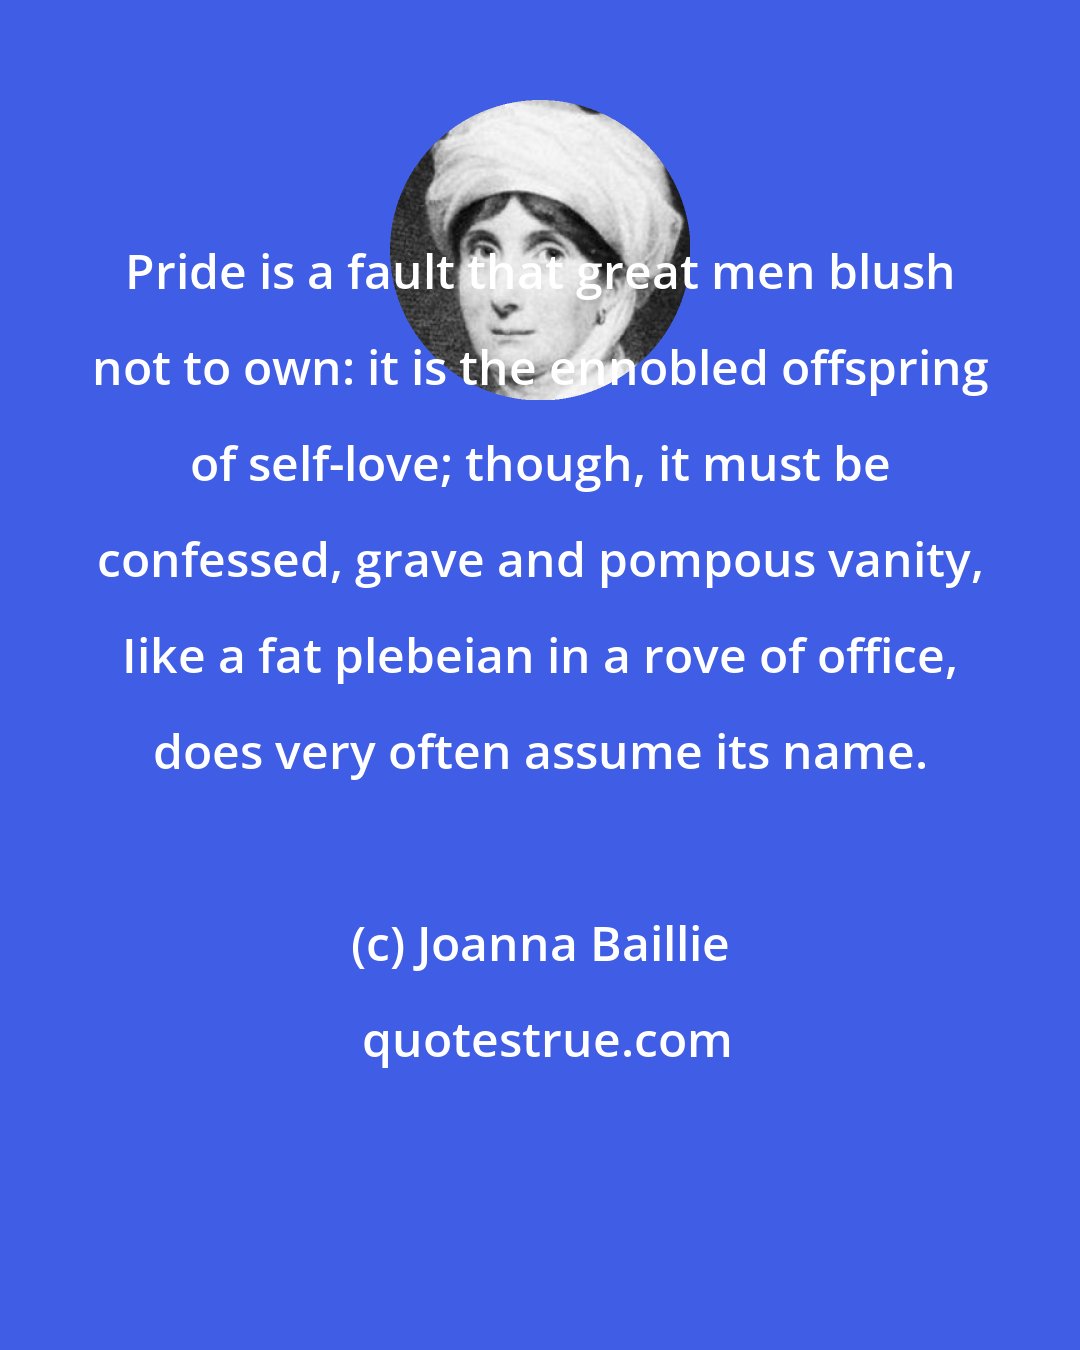 Joanna Baillie: Pride is a fault that great men blush not to own: it is the ennobled offspring of self-love; though, it must be confessed, grave and pompous vanity, Iike a fat plebeian in a rove of office, does very often assume its name.